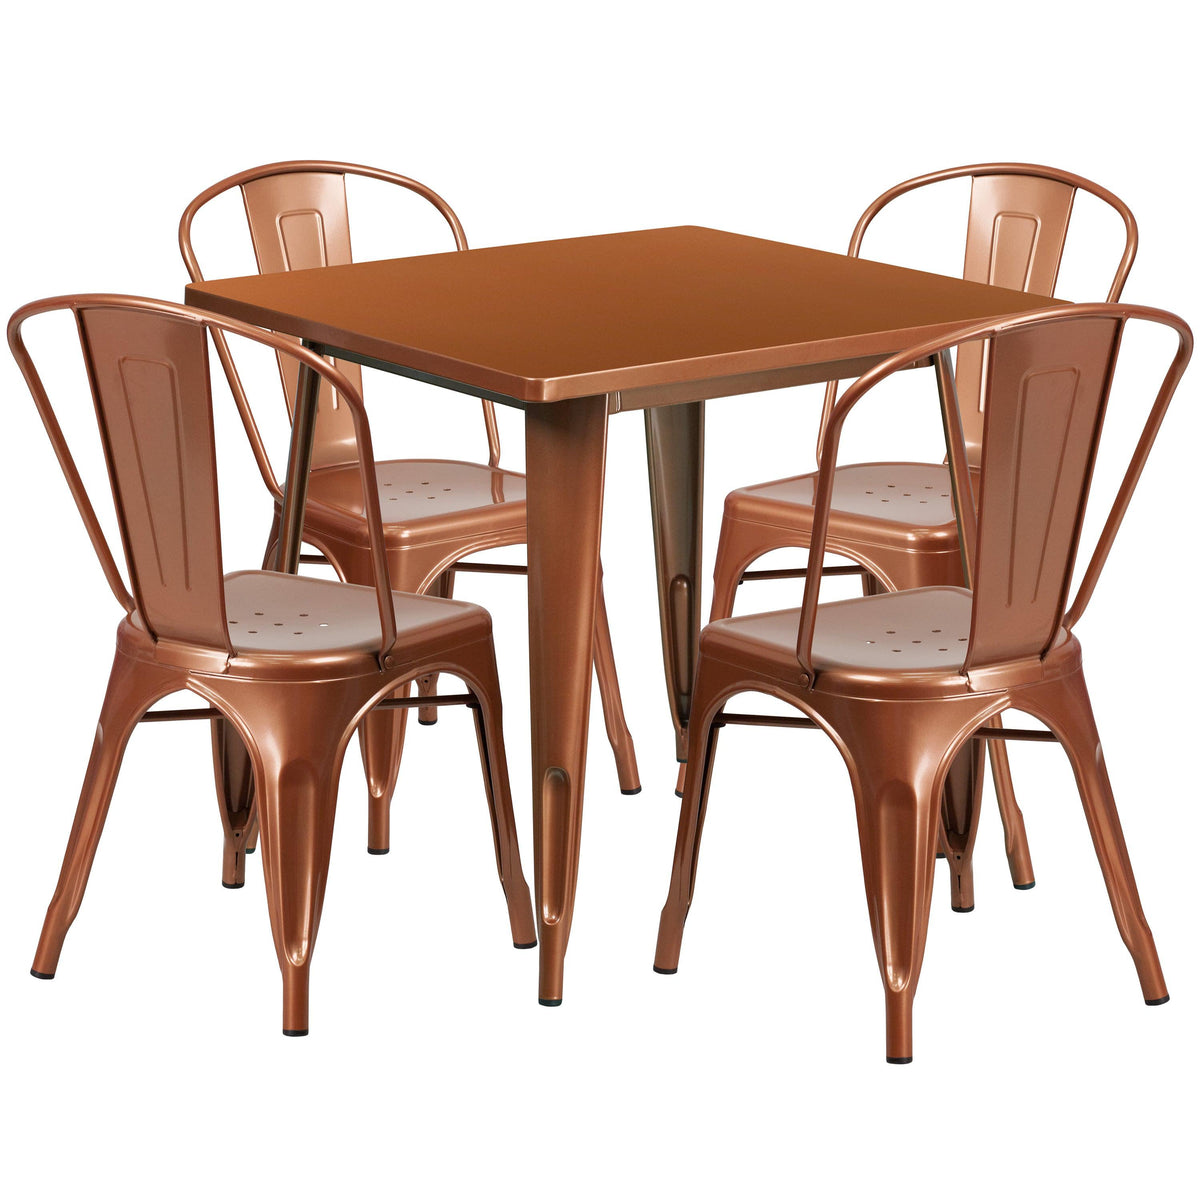 Copper |#| 31.5inch Square Copper Metal Indoor-Outdoor Table Set with 4 Stack Chairs